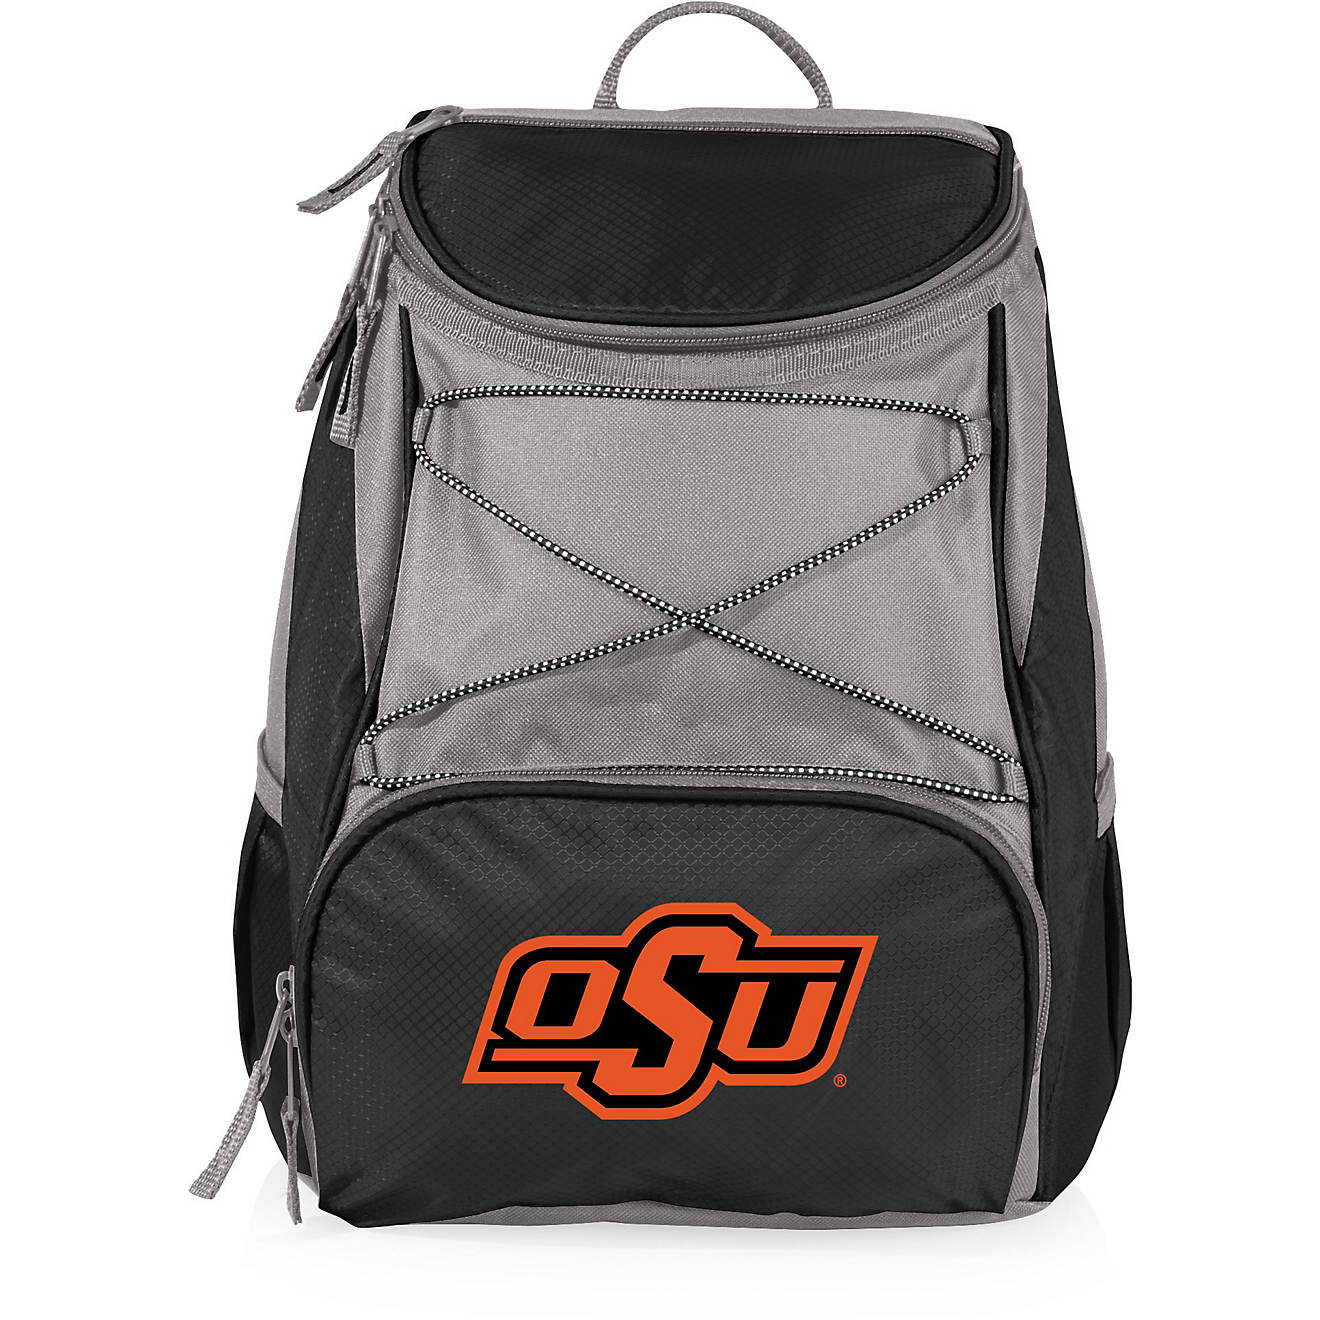 Picnic Time Oklahoma State University PTX Backpack Cooler                                                                        - view number 1